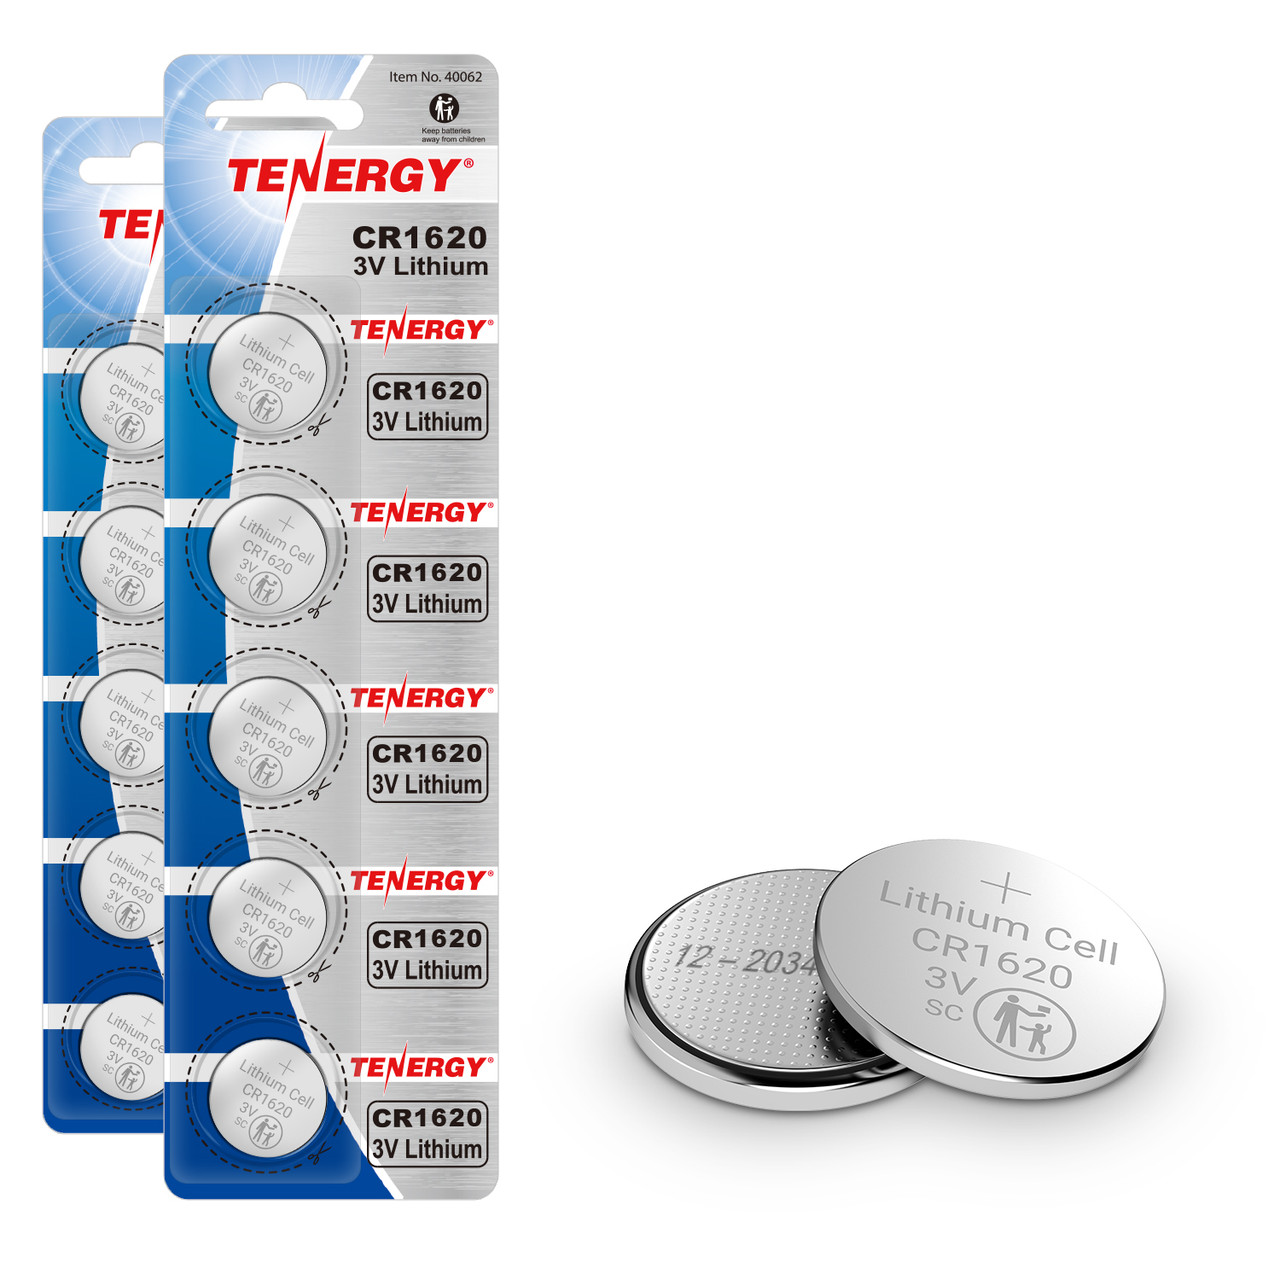 Tenergy CR1620 3V Lithium Button Cells 10 Pack (2 Card)